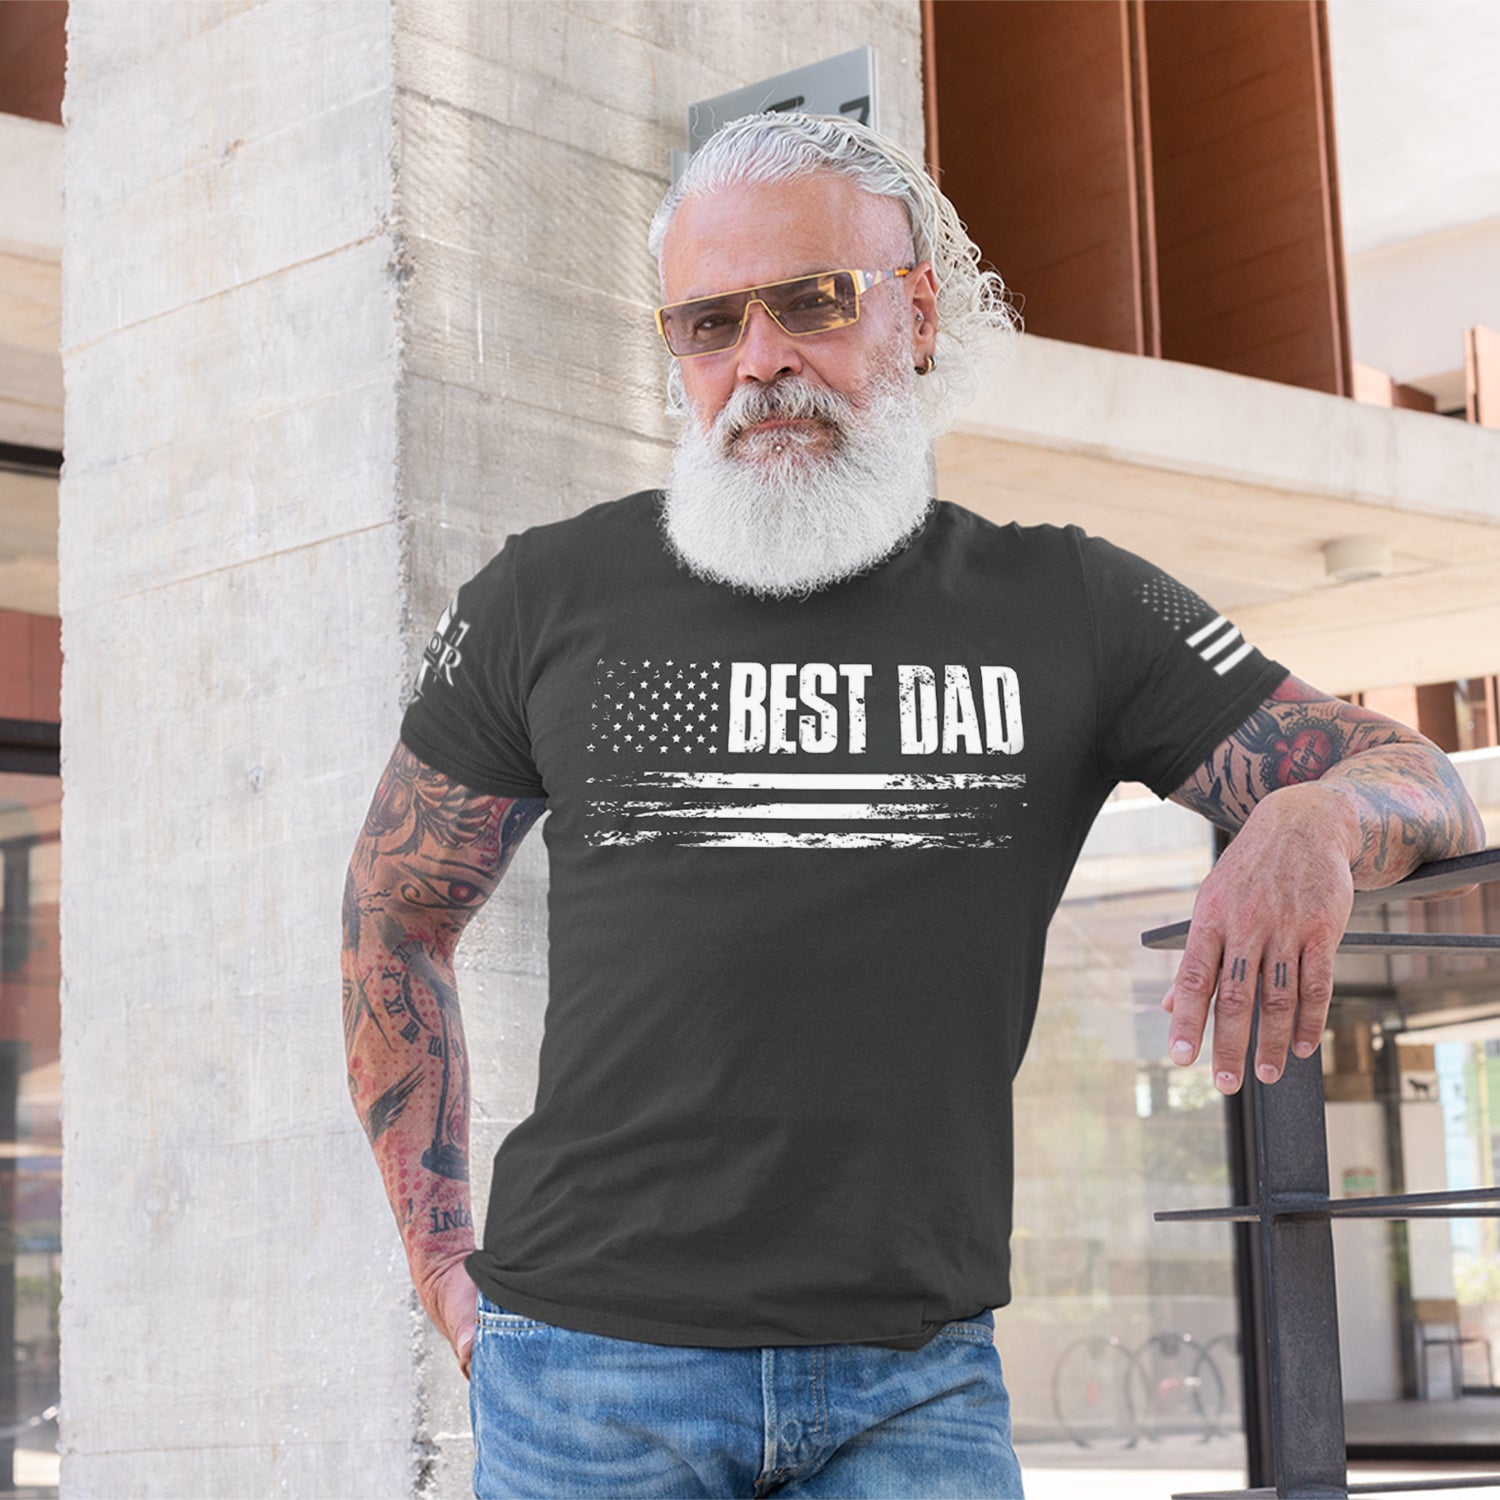 A proud father sporting our new best dad T-Shirt.